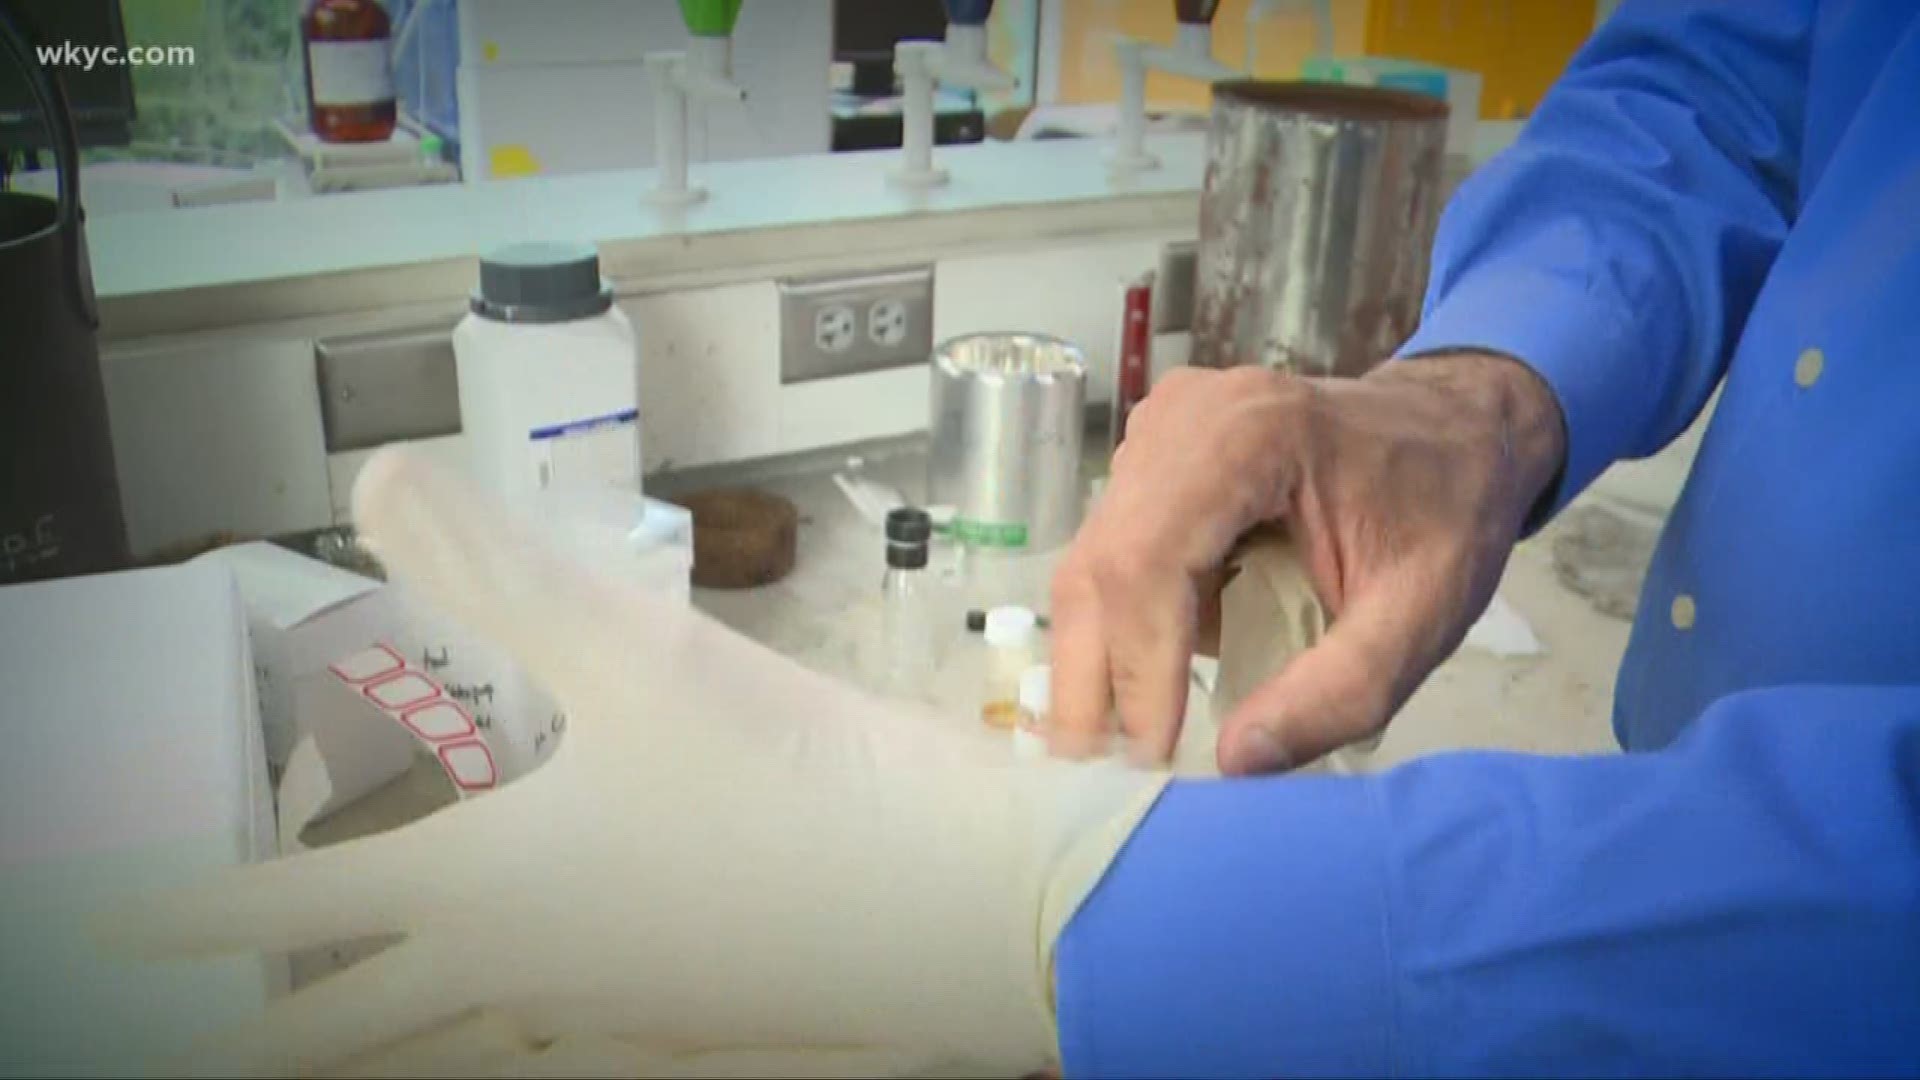 University of Akron professor developing opioid detecting glove for first responders